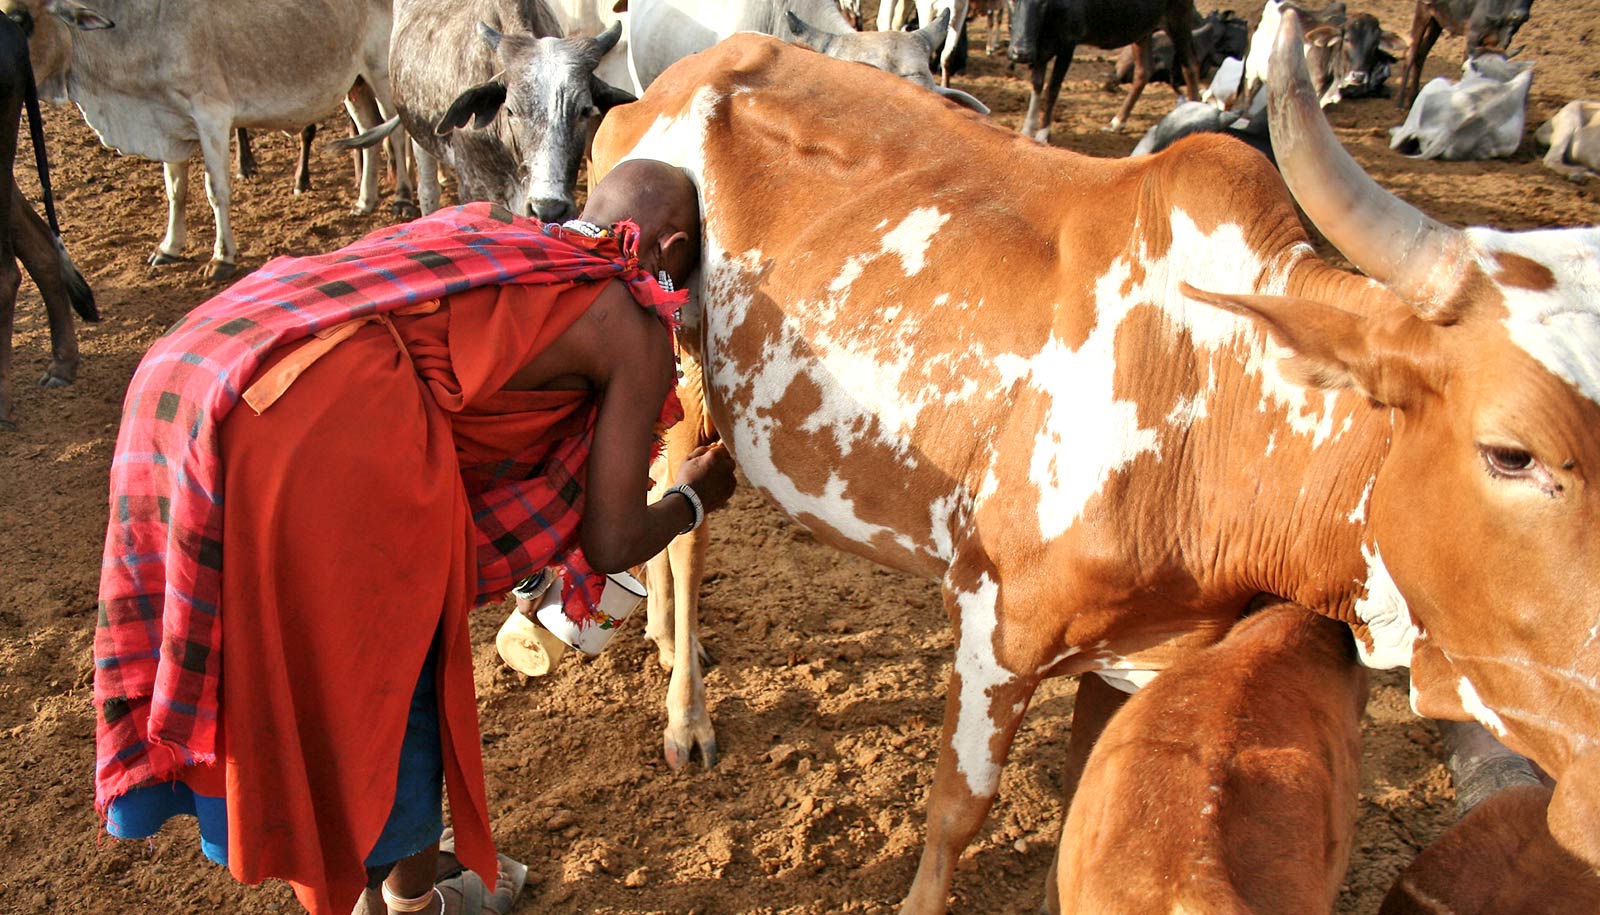 Moving milk in East Africa